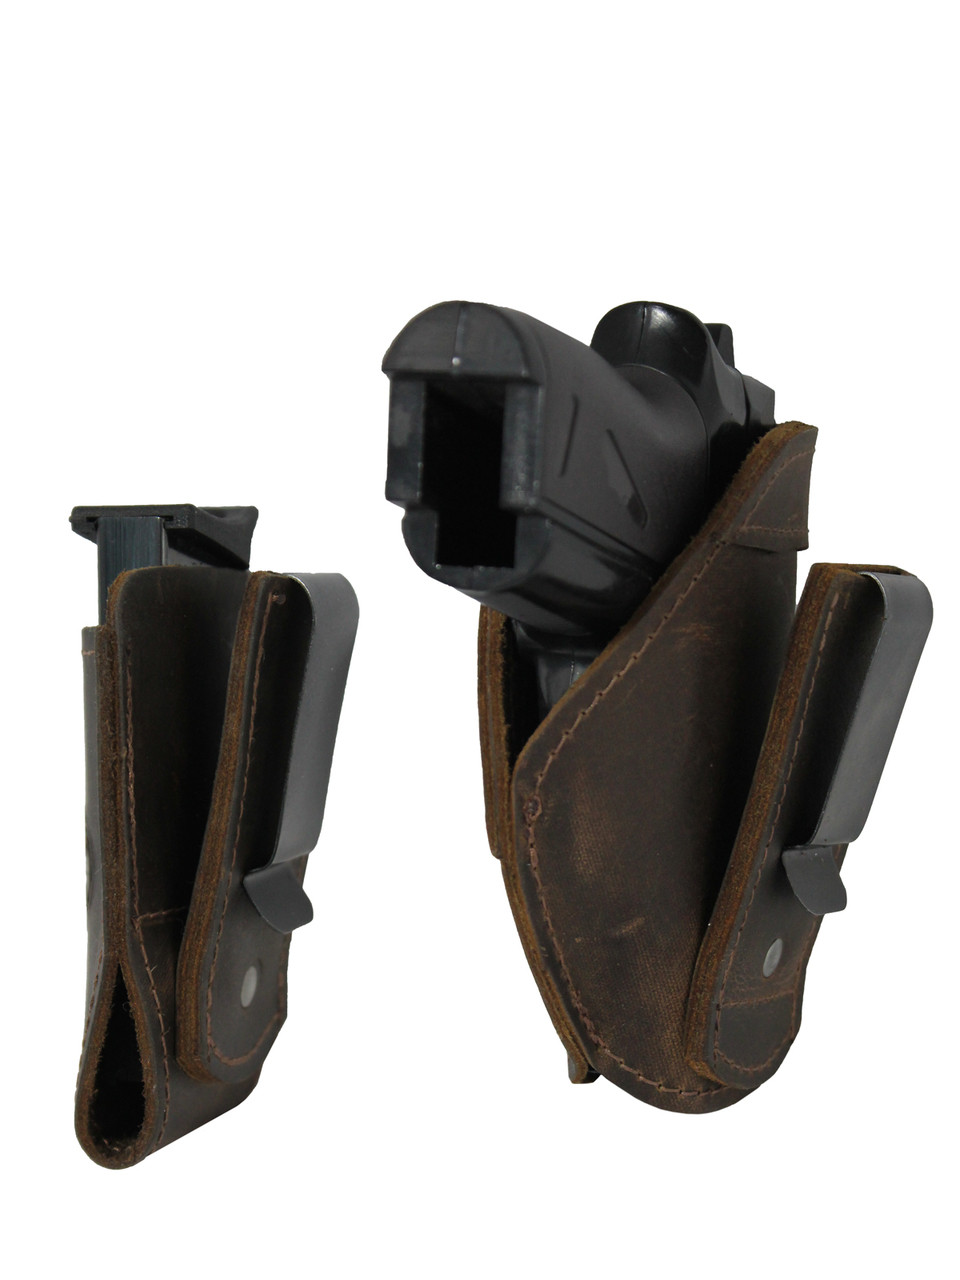 Brown Leather Tuckable IWB Holster + Magazine Pouch for Mini/Pocket .22 .25 .380 Pistols